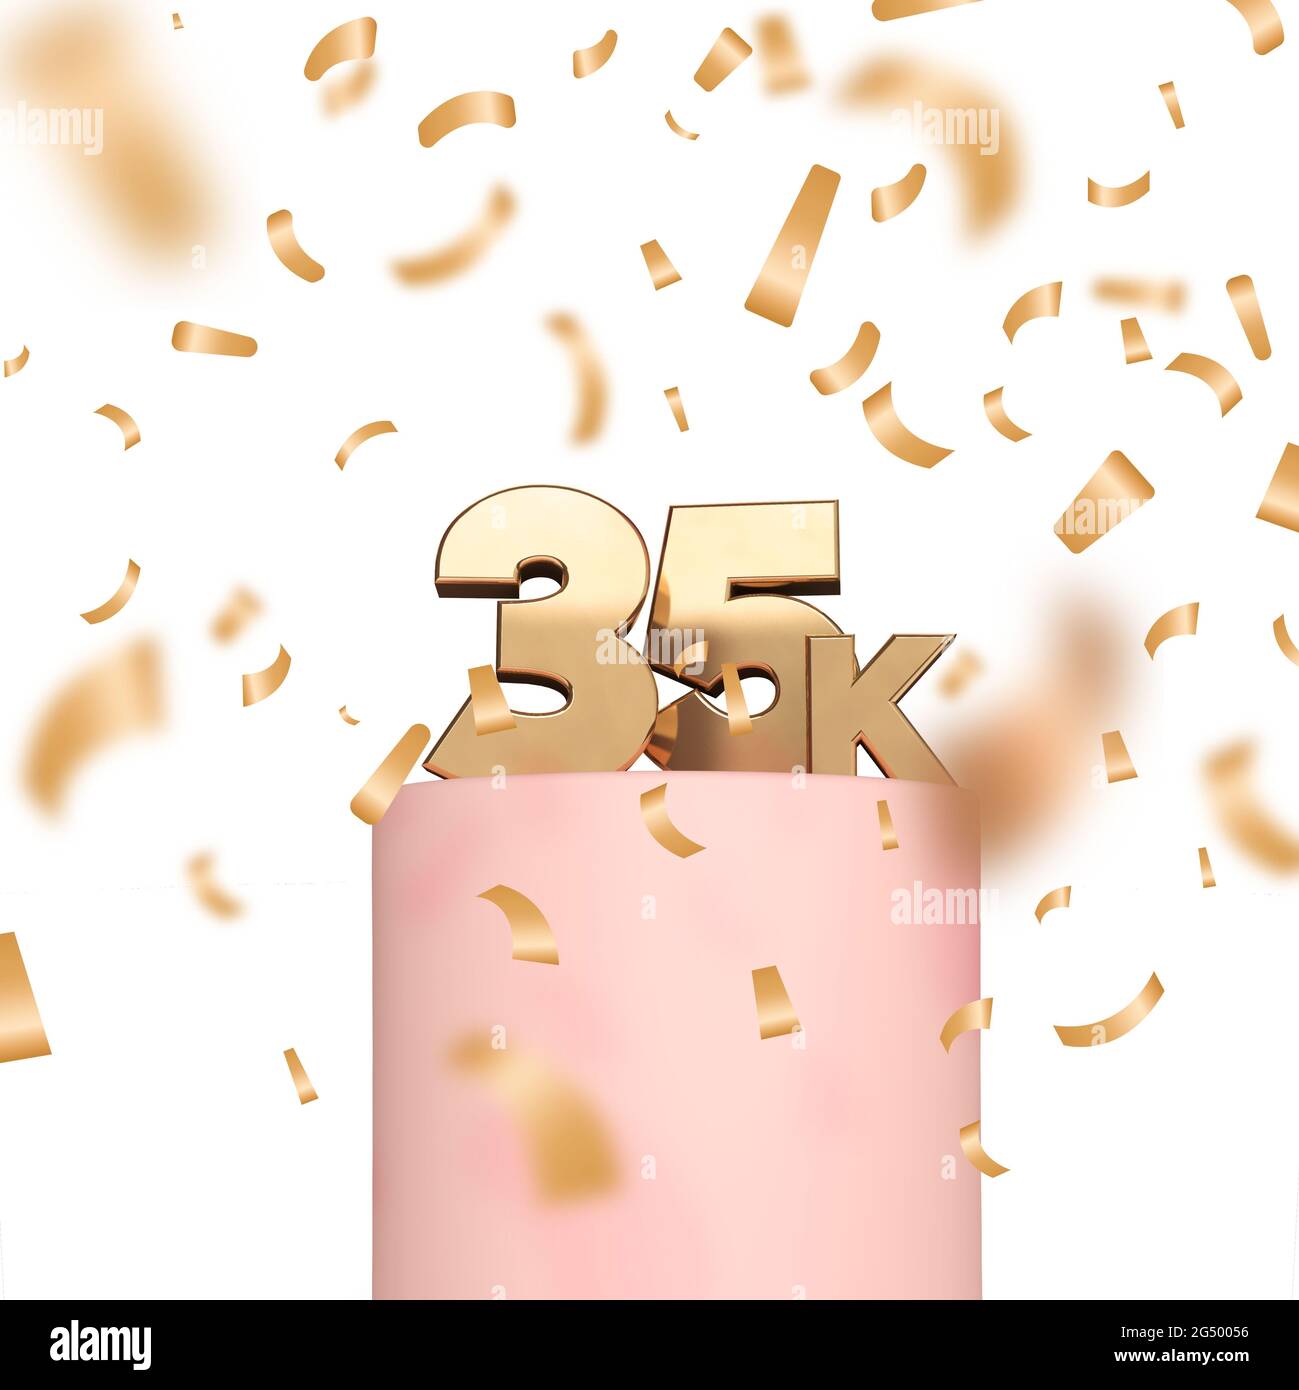 35k social media followers or subscribers celebration background. 3D Rendering Stock Photo